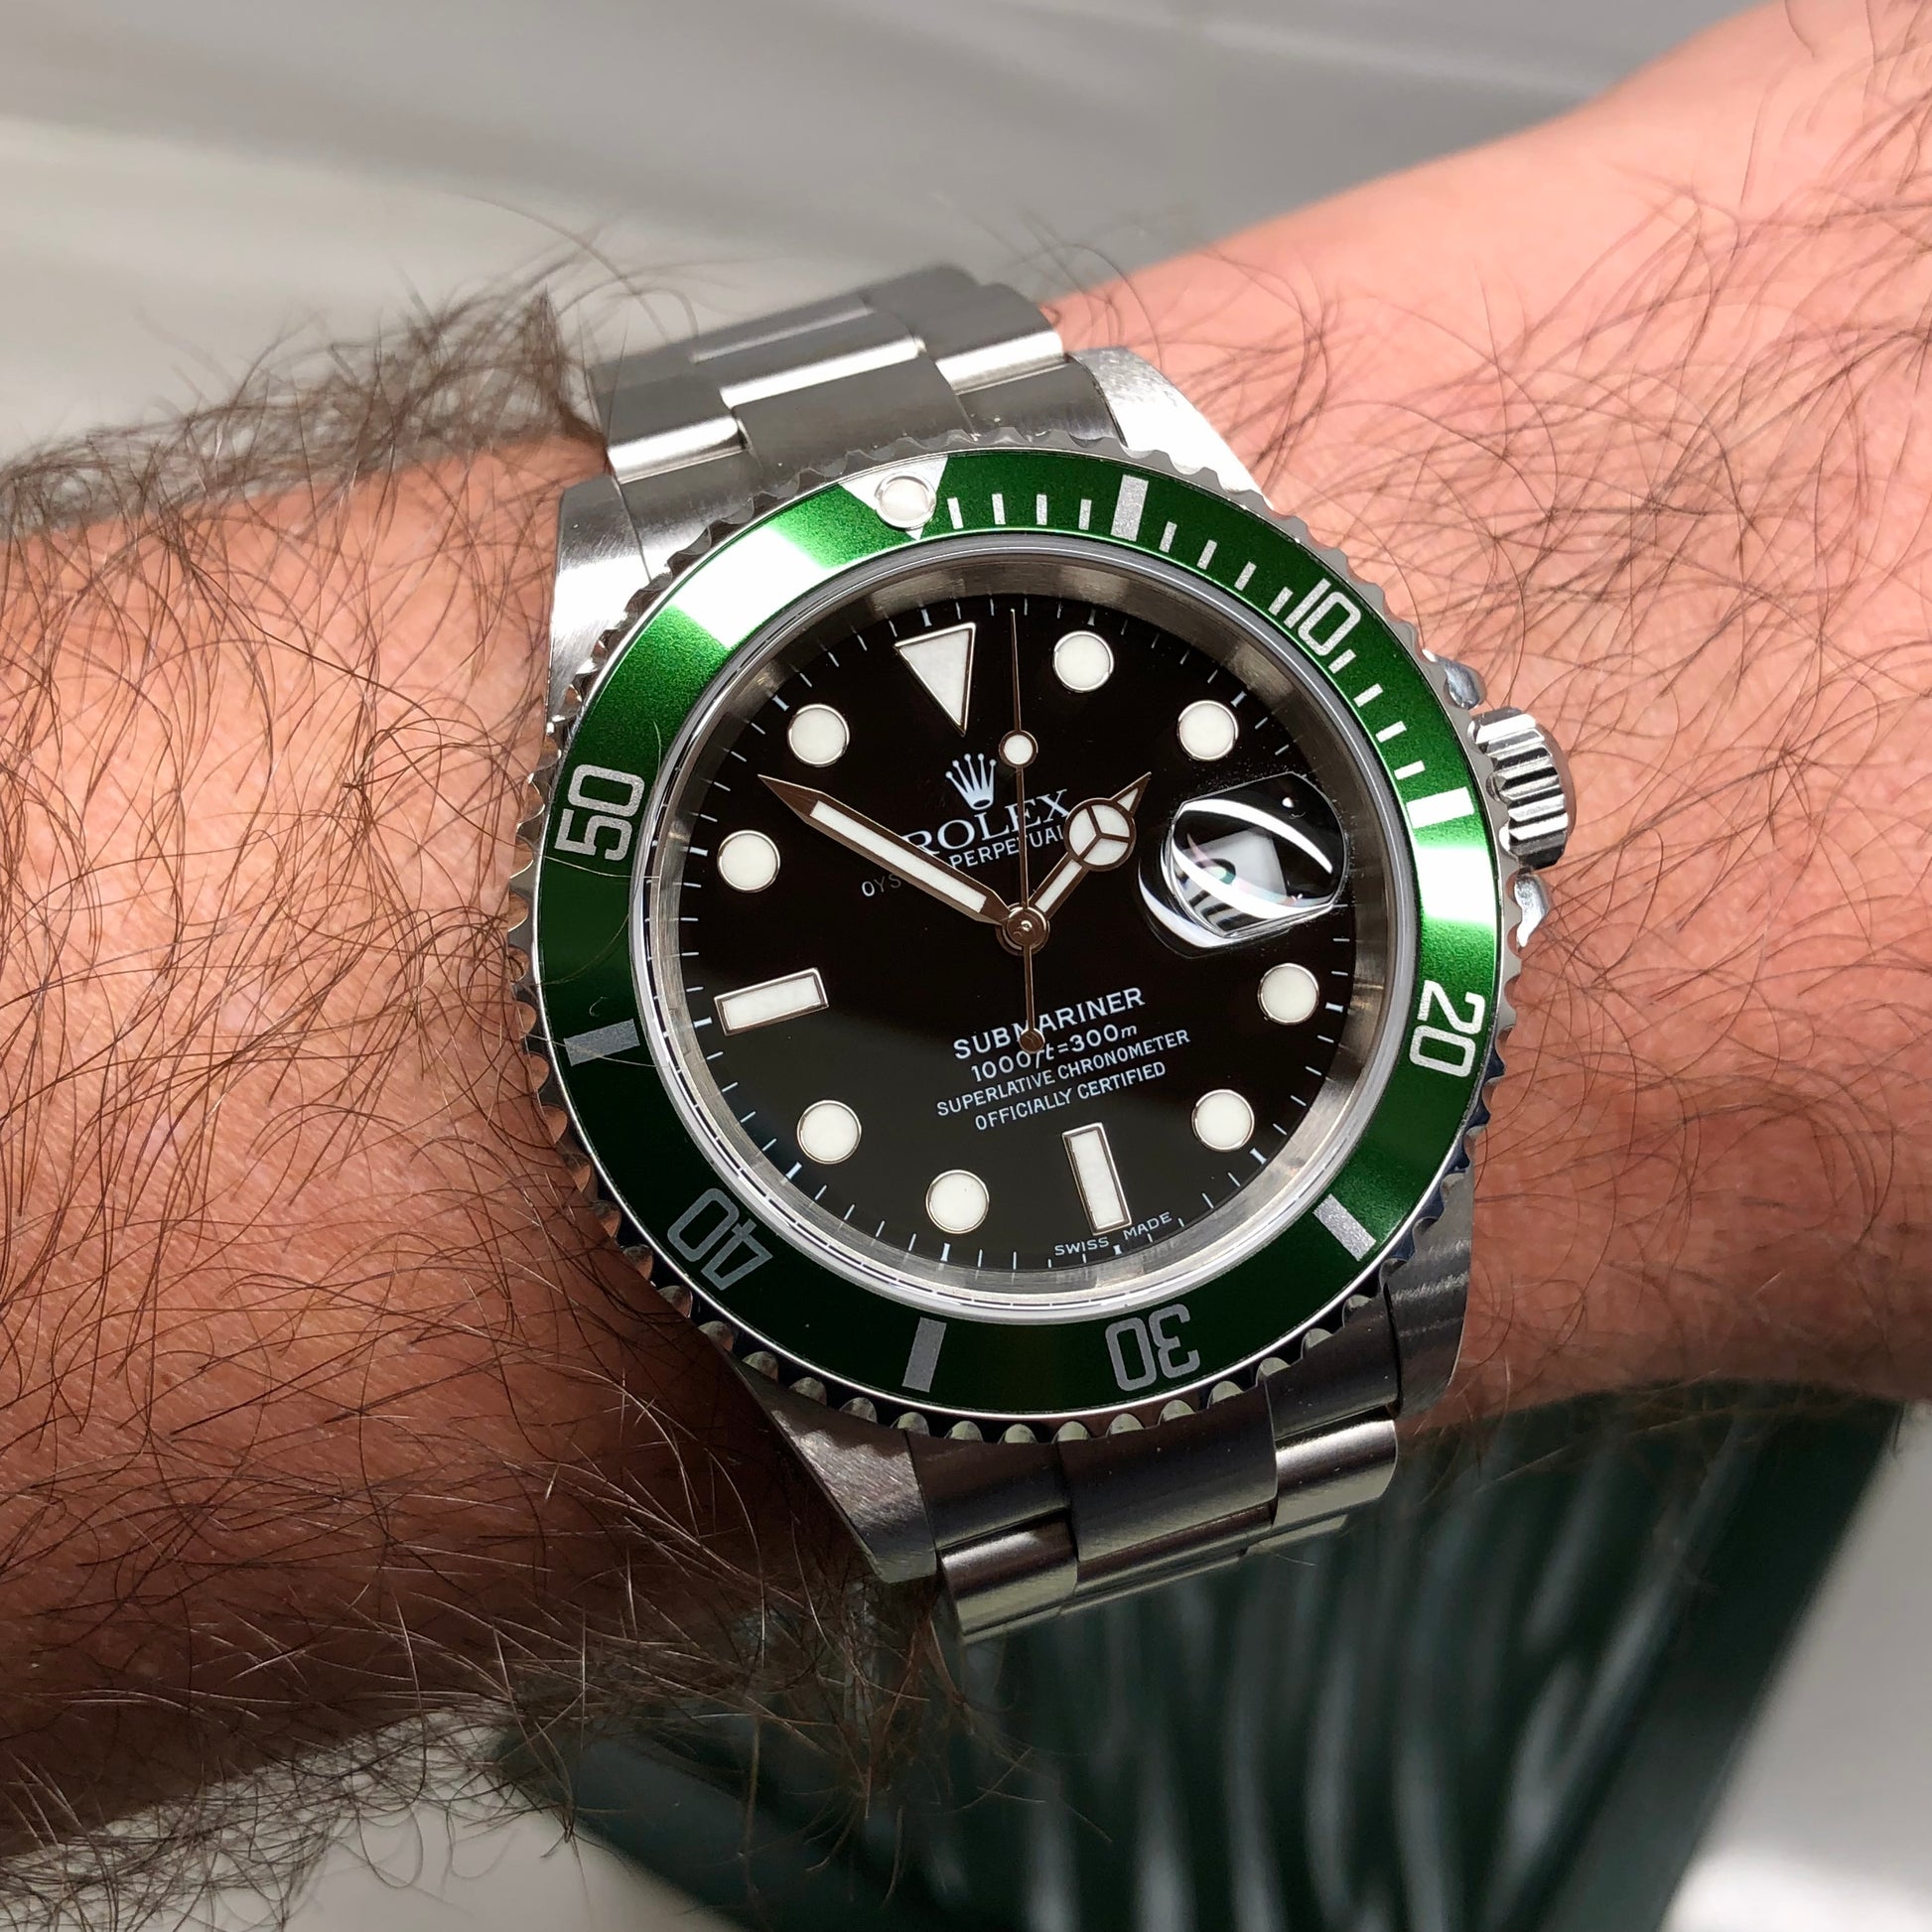 2004 Rolex Submariner 16610LV Kermit Flat Four Green Bezel 50th Anniversary Wristwatch with Box and Papers